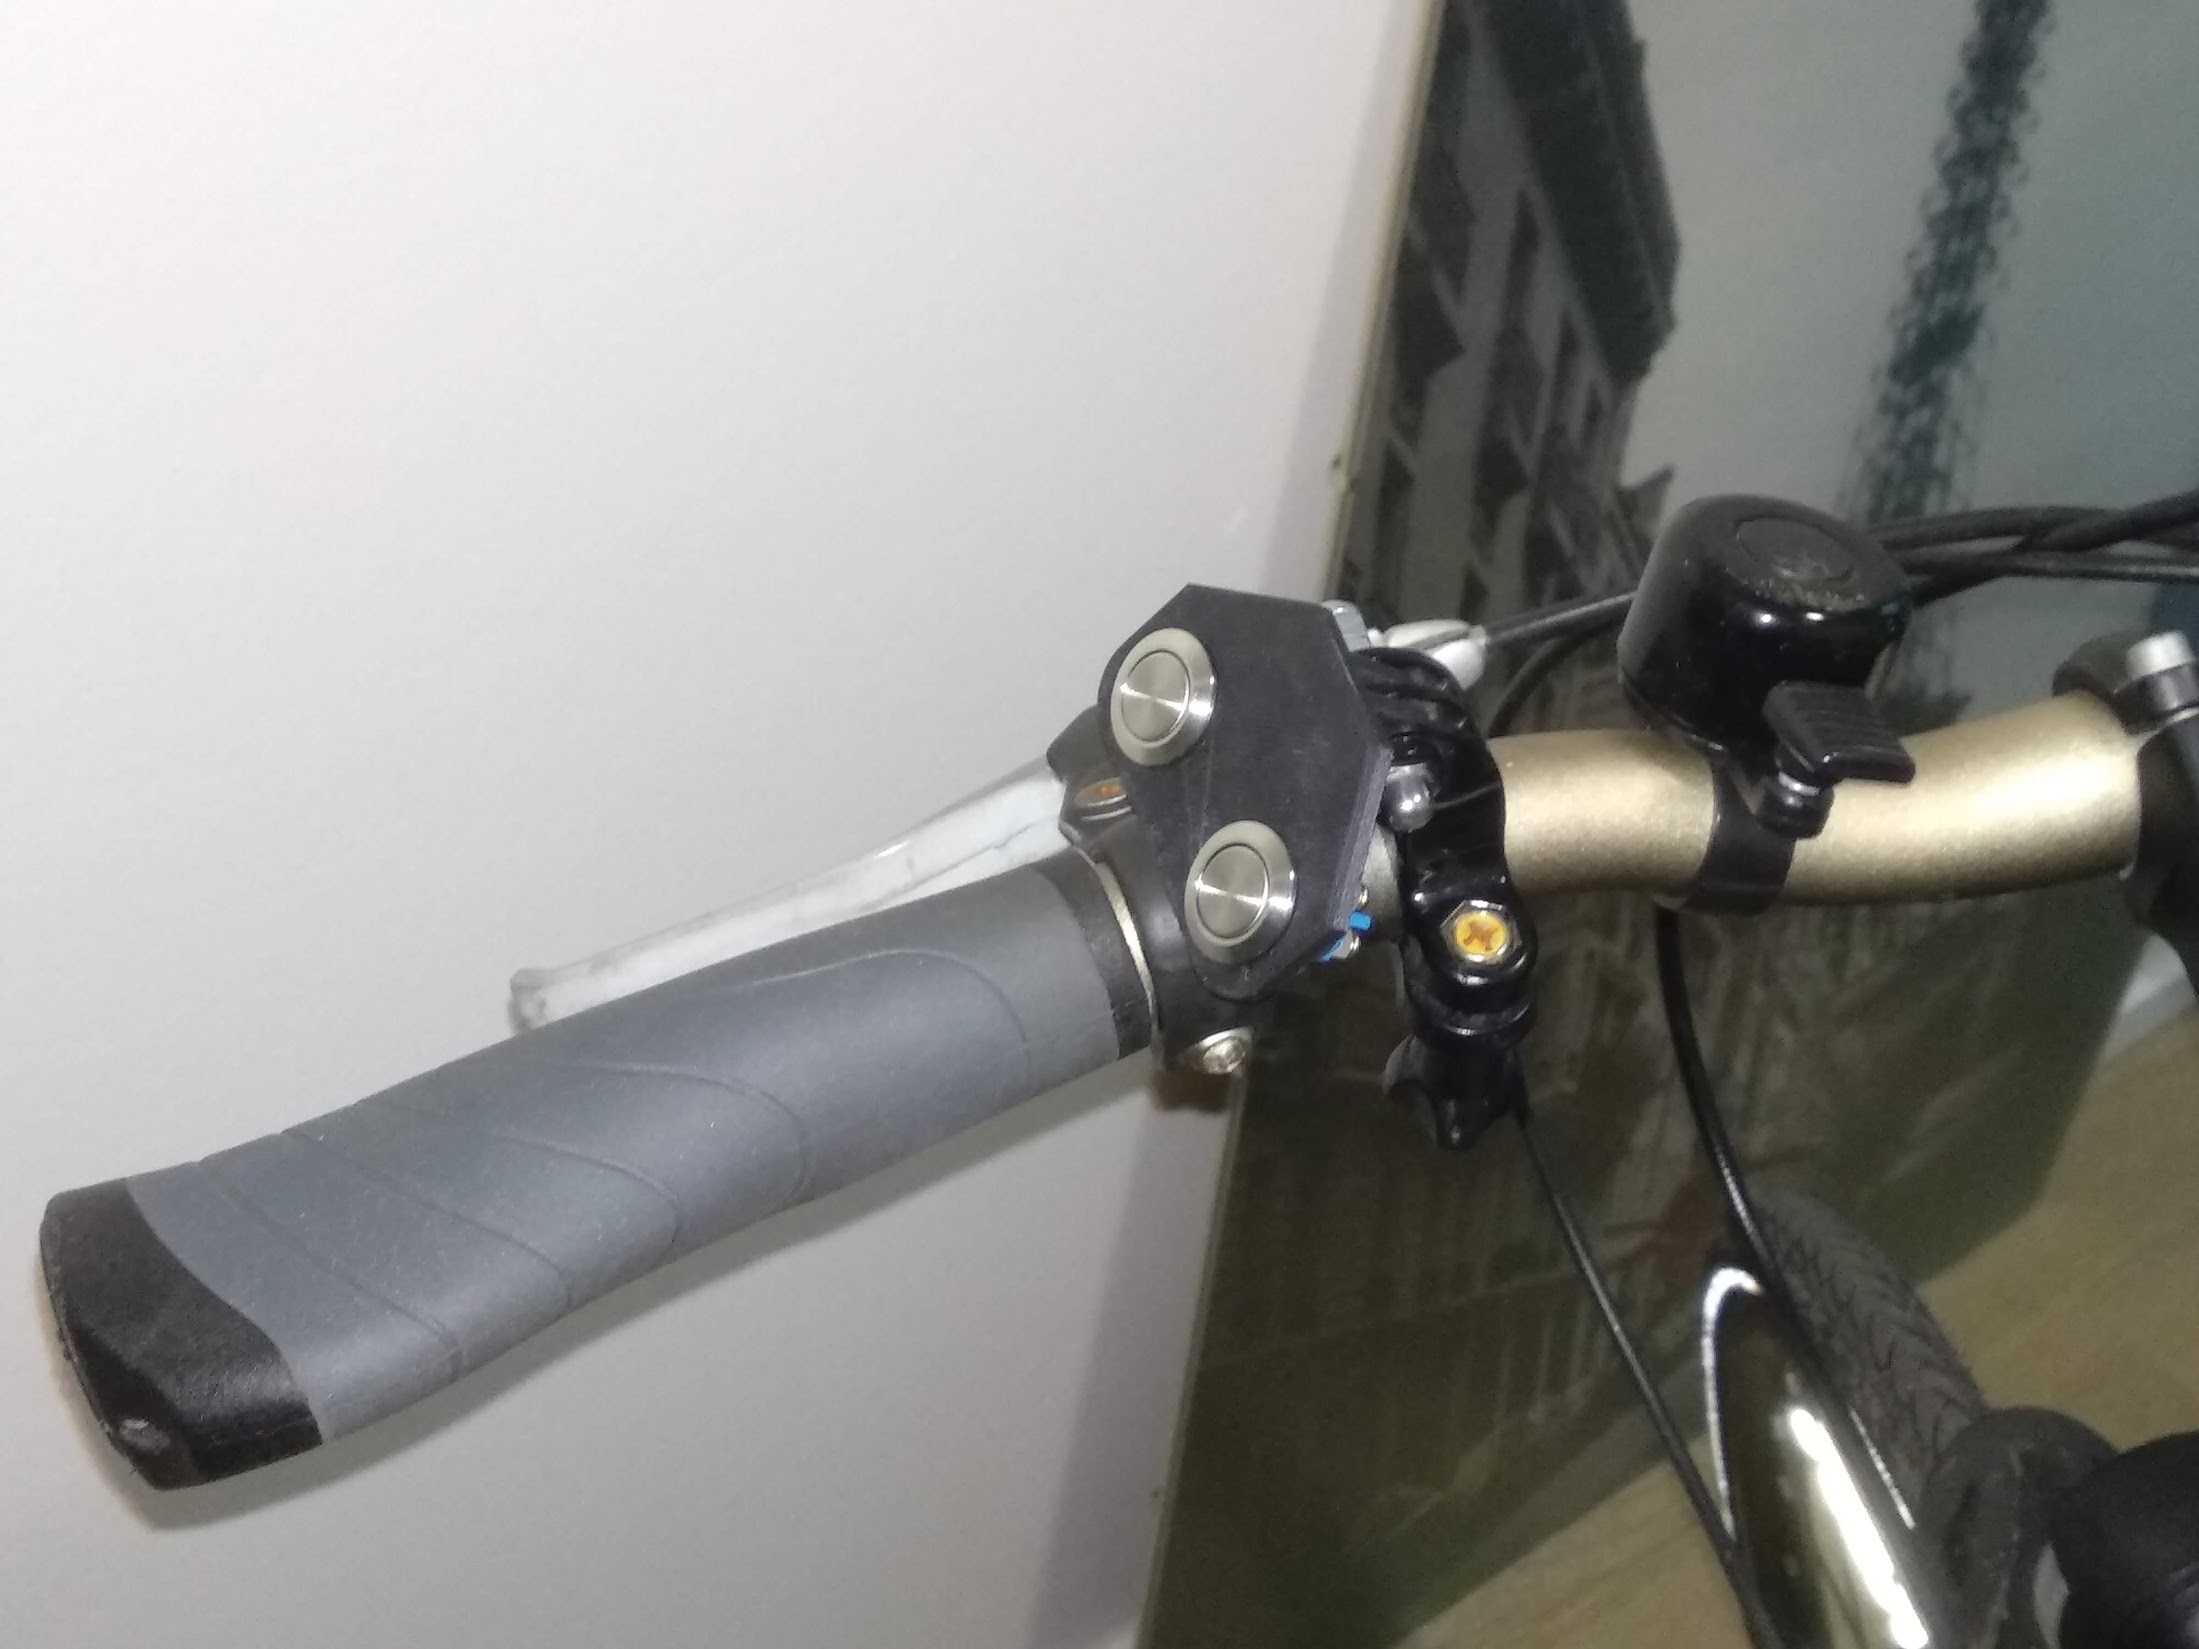 A 3D print with two steel buttons mounted onto a bicycle handlebar